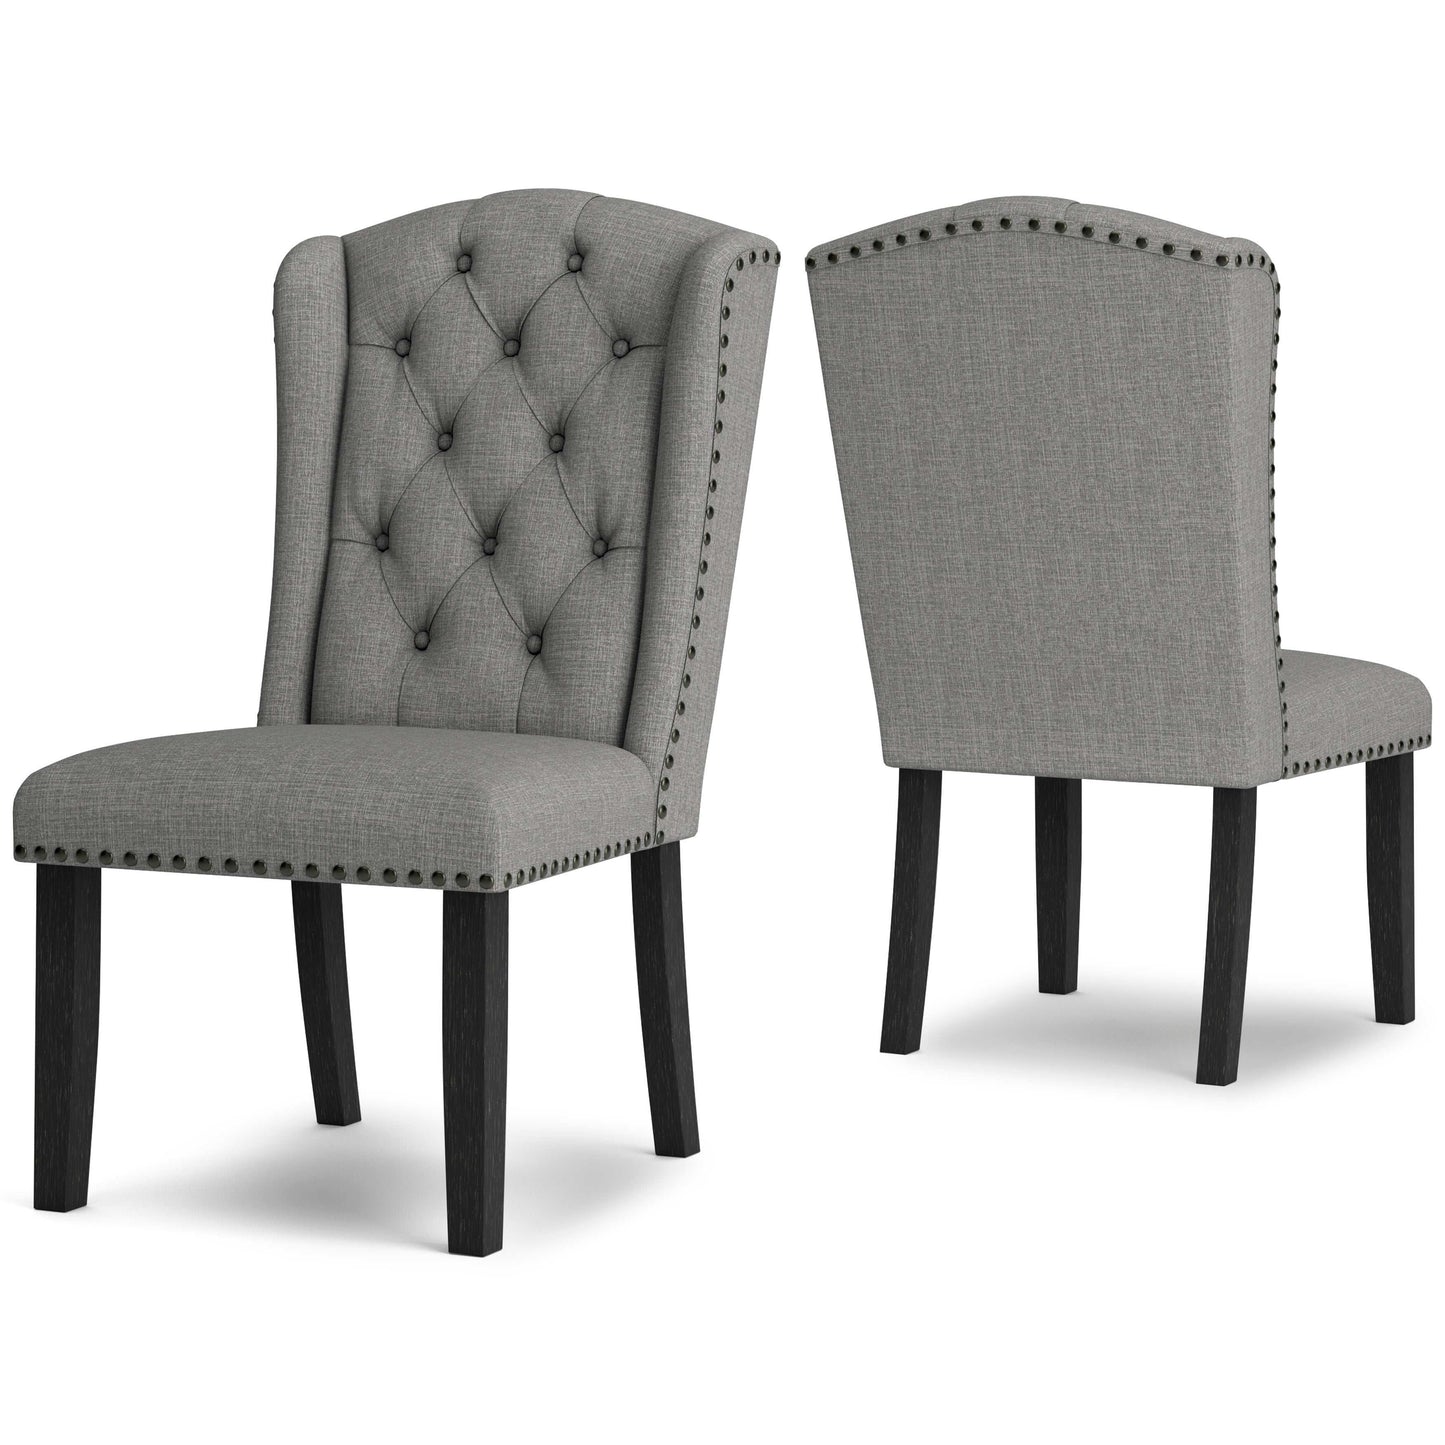 Jeanette Gray Dining Chair (Set of 2)